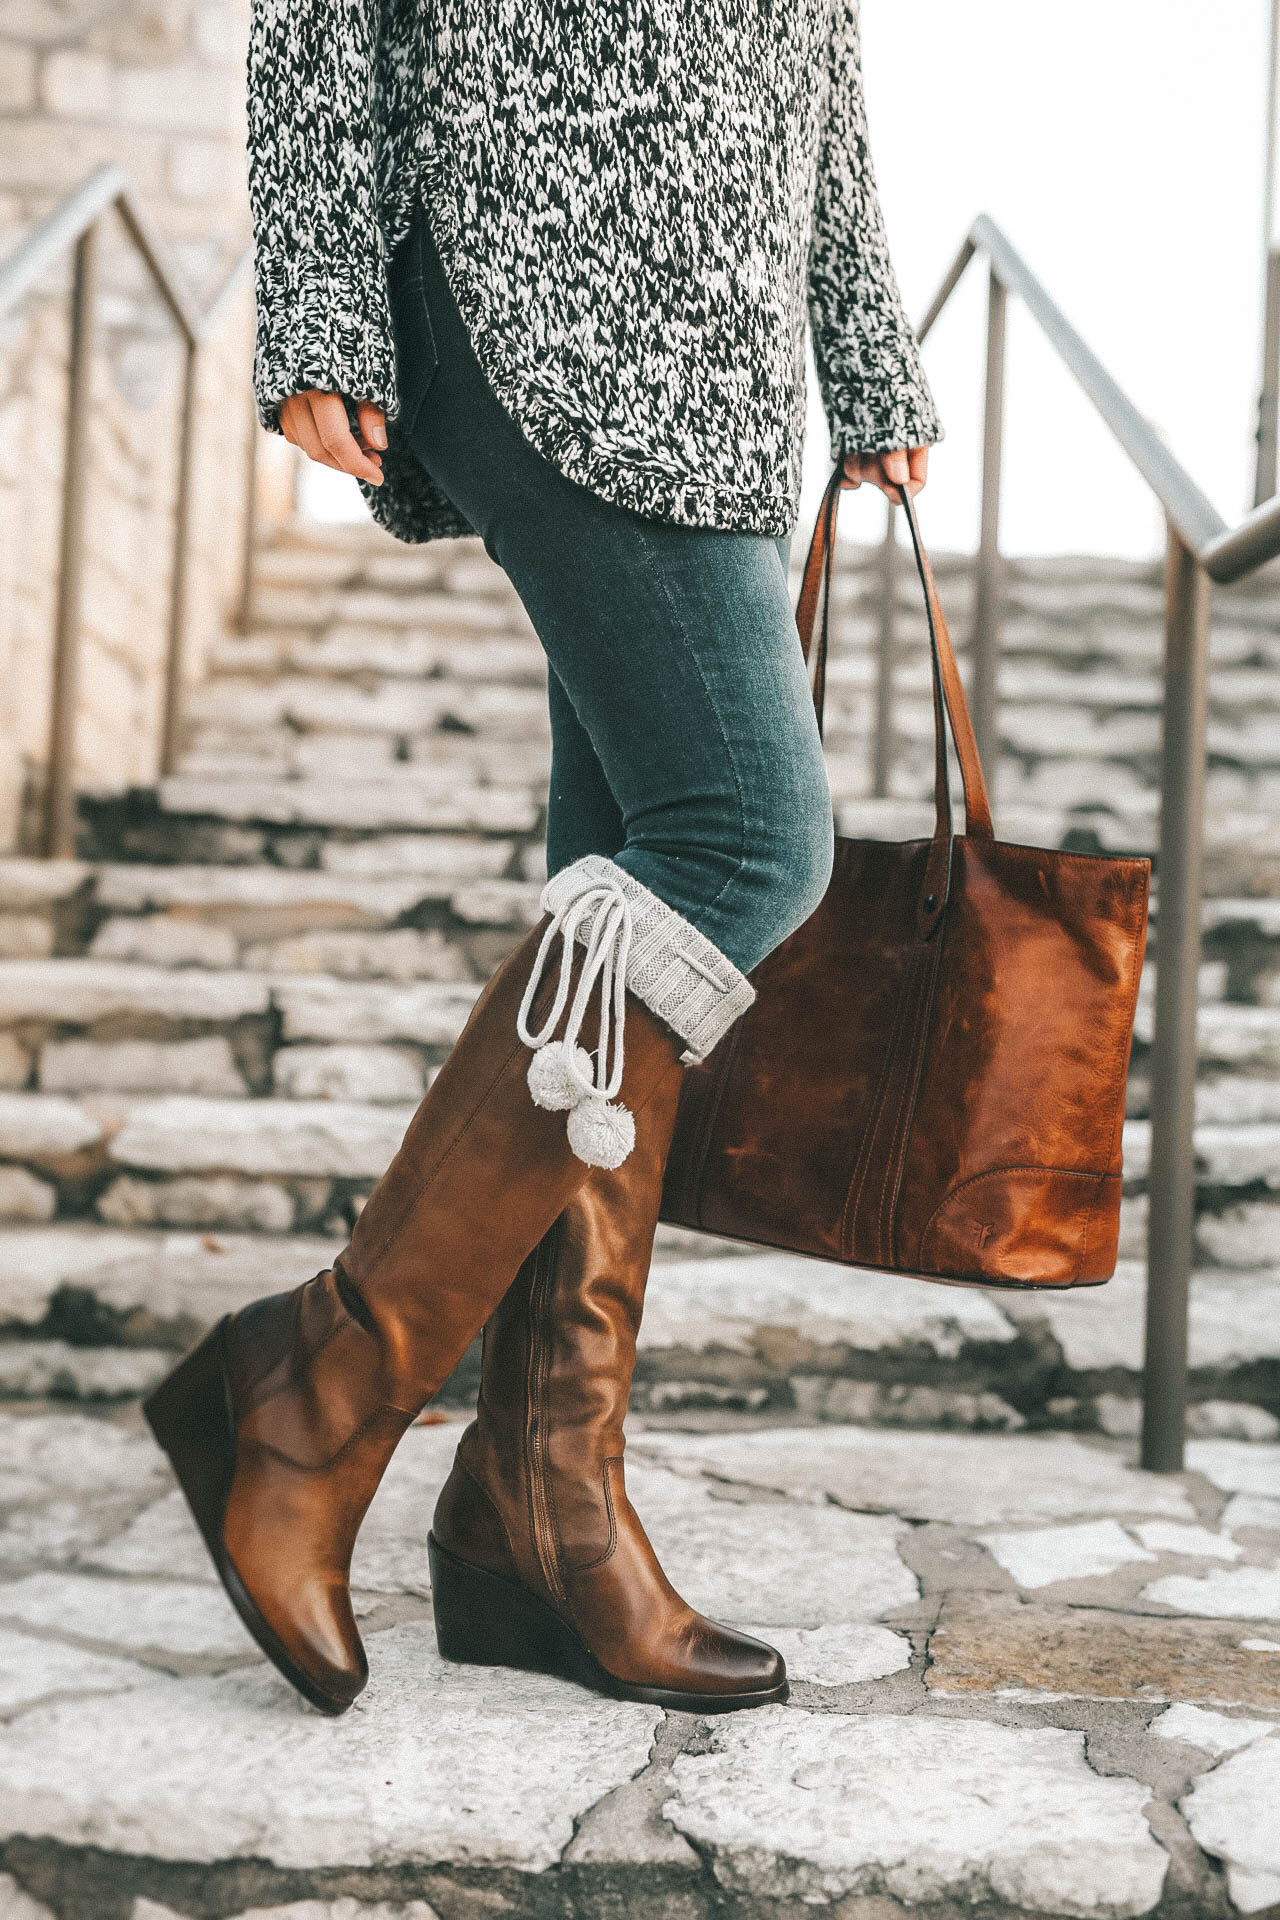 DTKAustin is sharing the best investment boots for Fall and Winter with Frye and Zappos. Ashley is wearing Knee high pom pom socks from UGG, skinny jeans from Levis, a chunky knit beanie from Sole Society, Melissa Frye Tote and a knit sweater from Nordstrom. || Dressed to Kill #winterboots #womensboots #fryeboots #dtkaustin